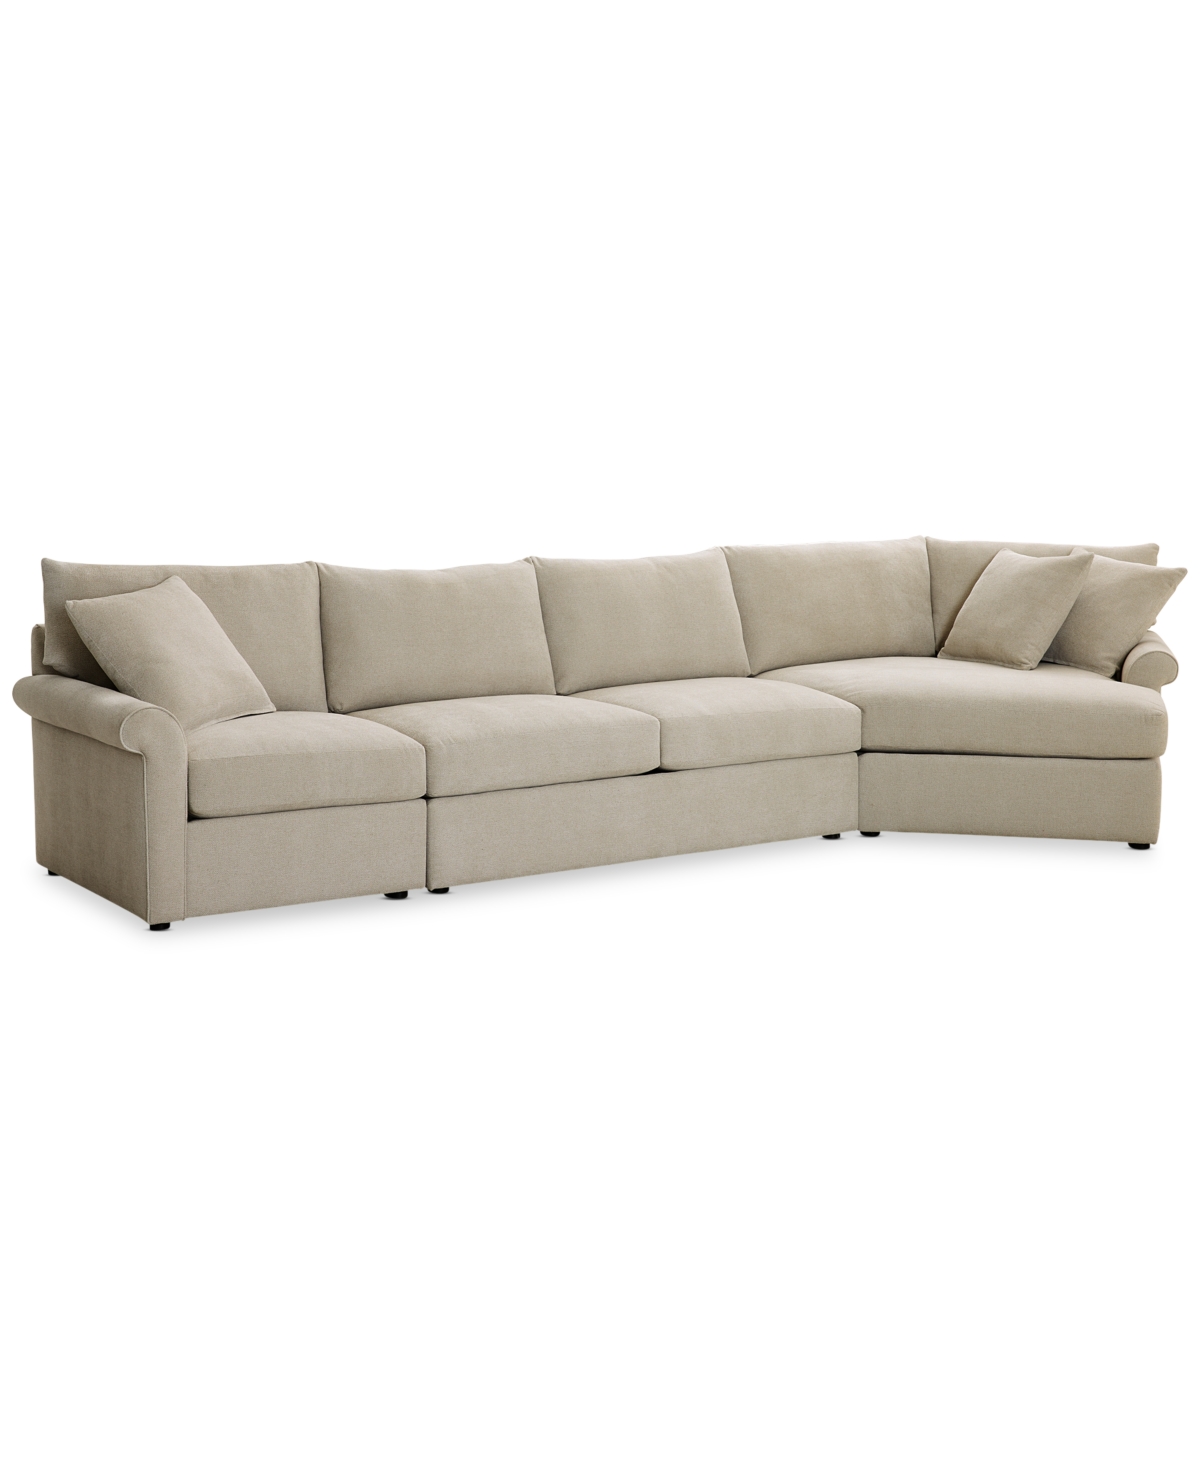 Furniture Wrenley 166" 3-pc. Fabric Cuddler Chaise Sectional Sofa, Created For Macy's In Dove